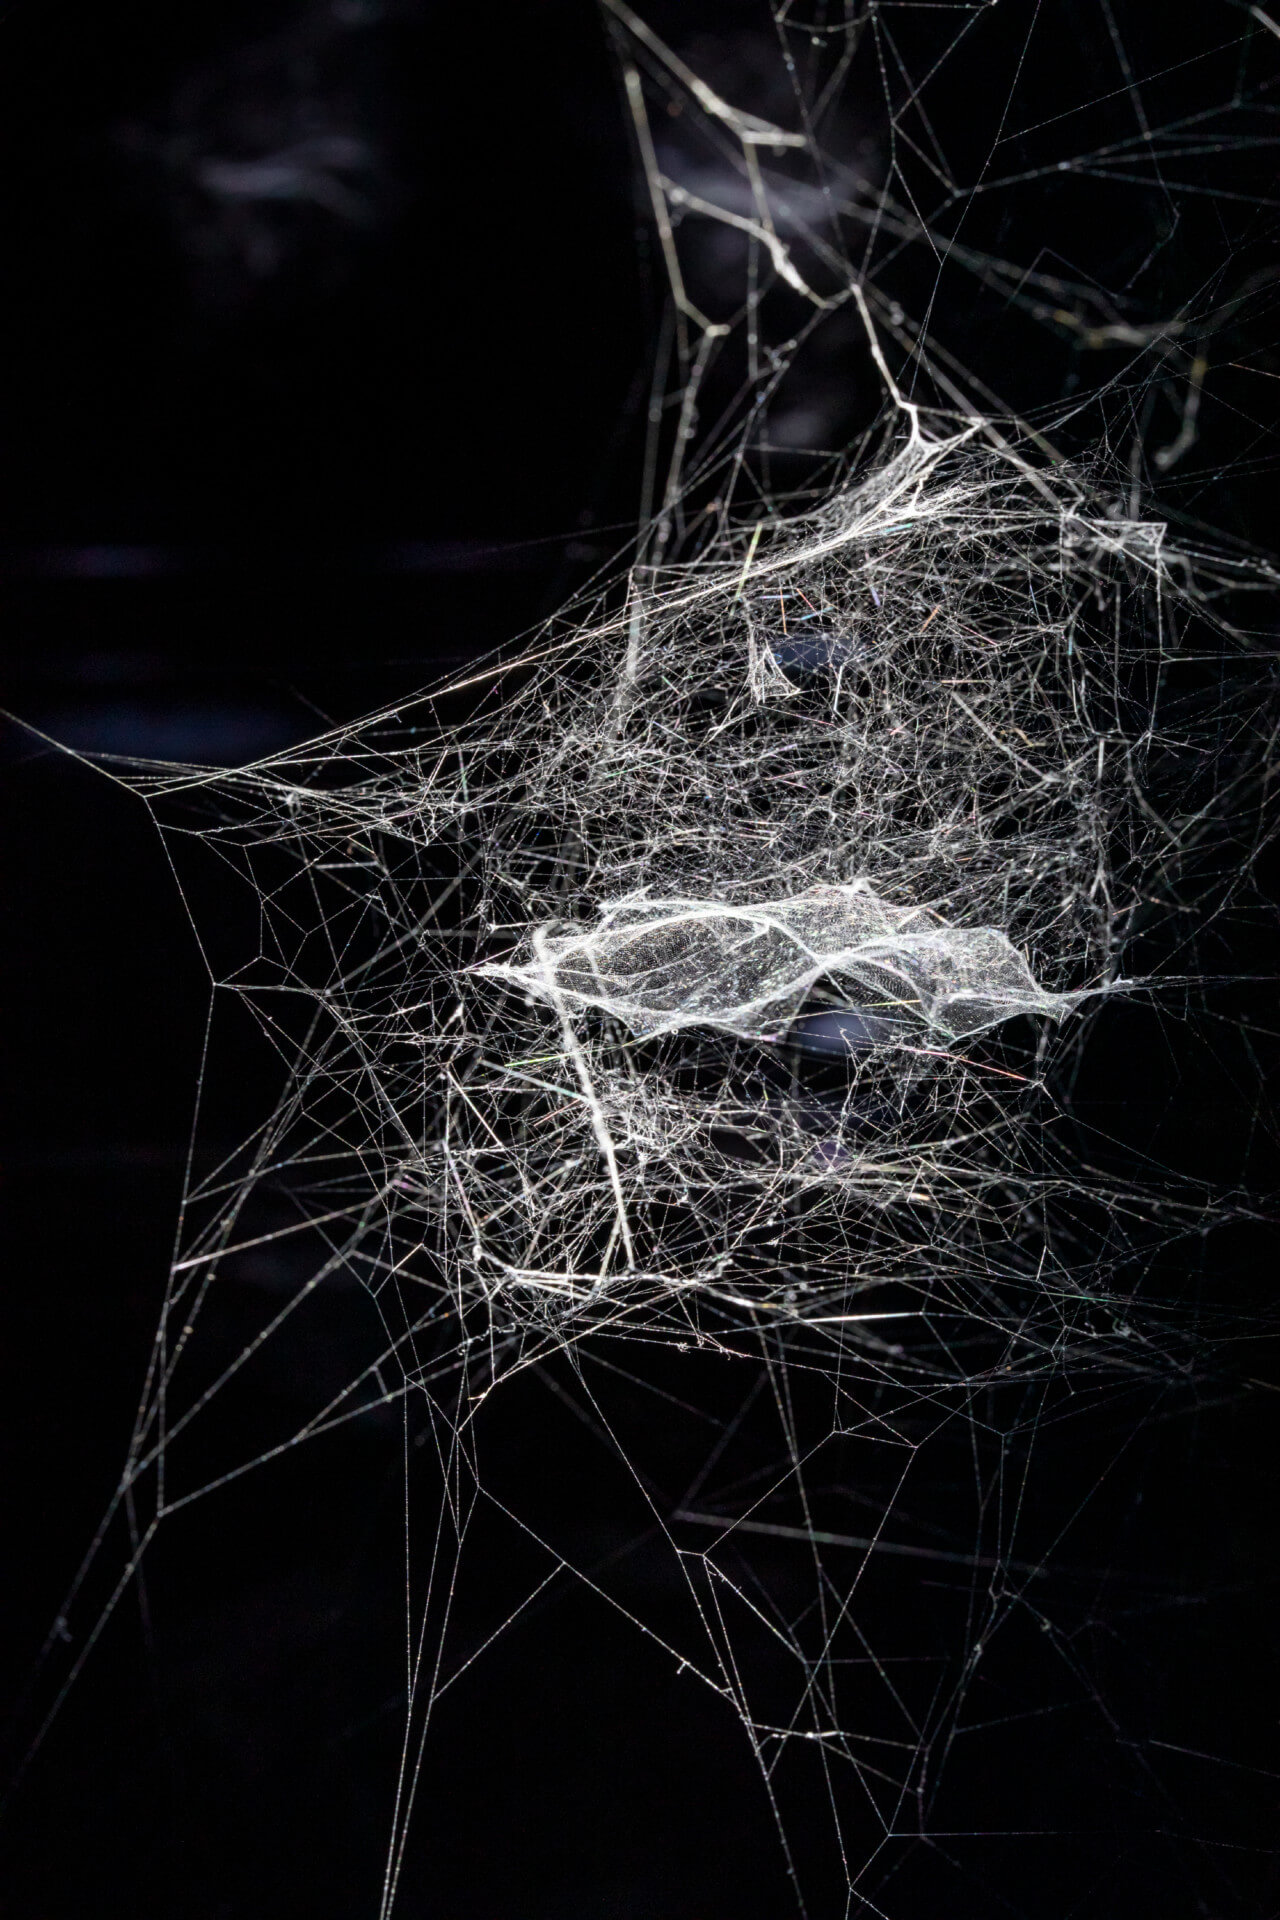 looking at spider webs suspended in a black gallery